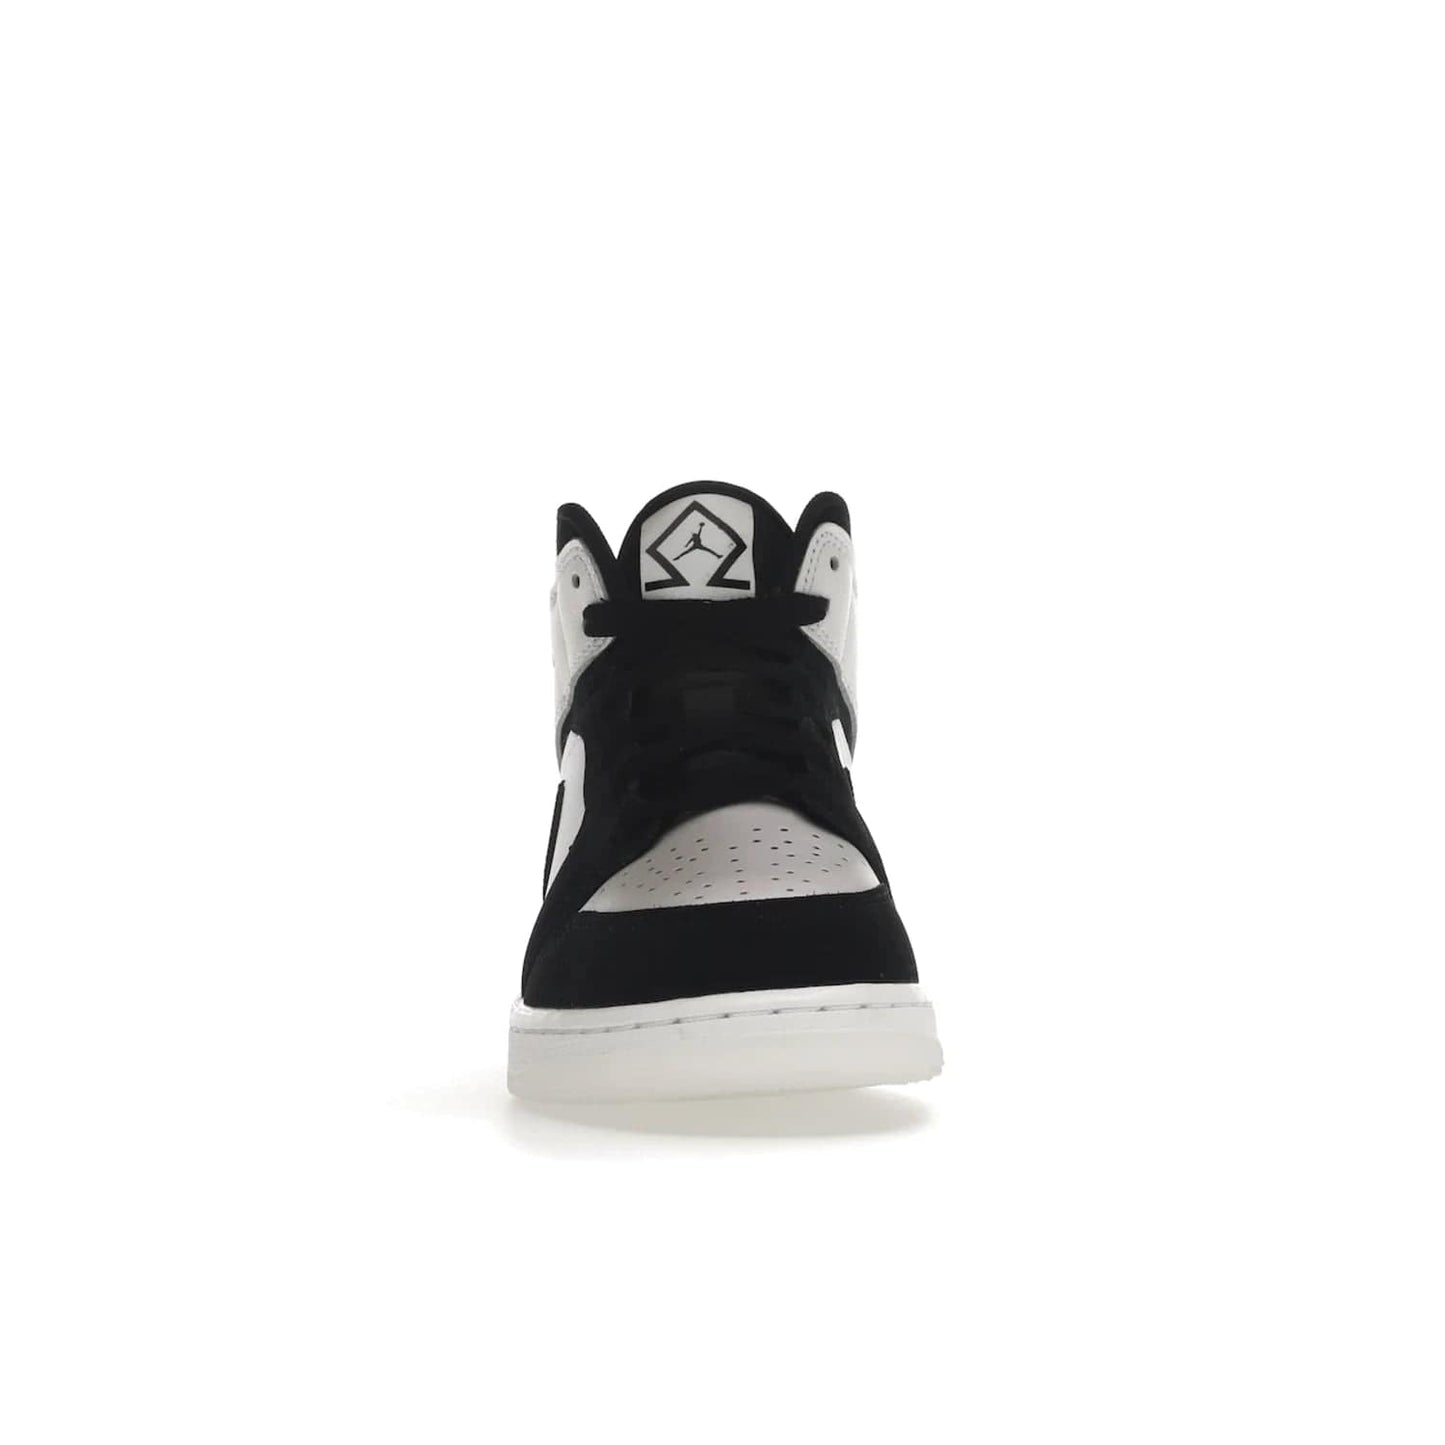 Jordan 1 Mid Diamond Shorts (GS) - Image 10 - Only at www.BallersClubKickz.com - Get the Jordan 1 Mid Diamond Shorts GS on 9th Feb 2022! Features a white, black & suede design with nylon tongue, stamped wings logo, rubber midsole & outsole. Only $100!